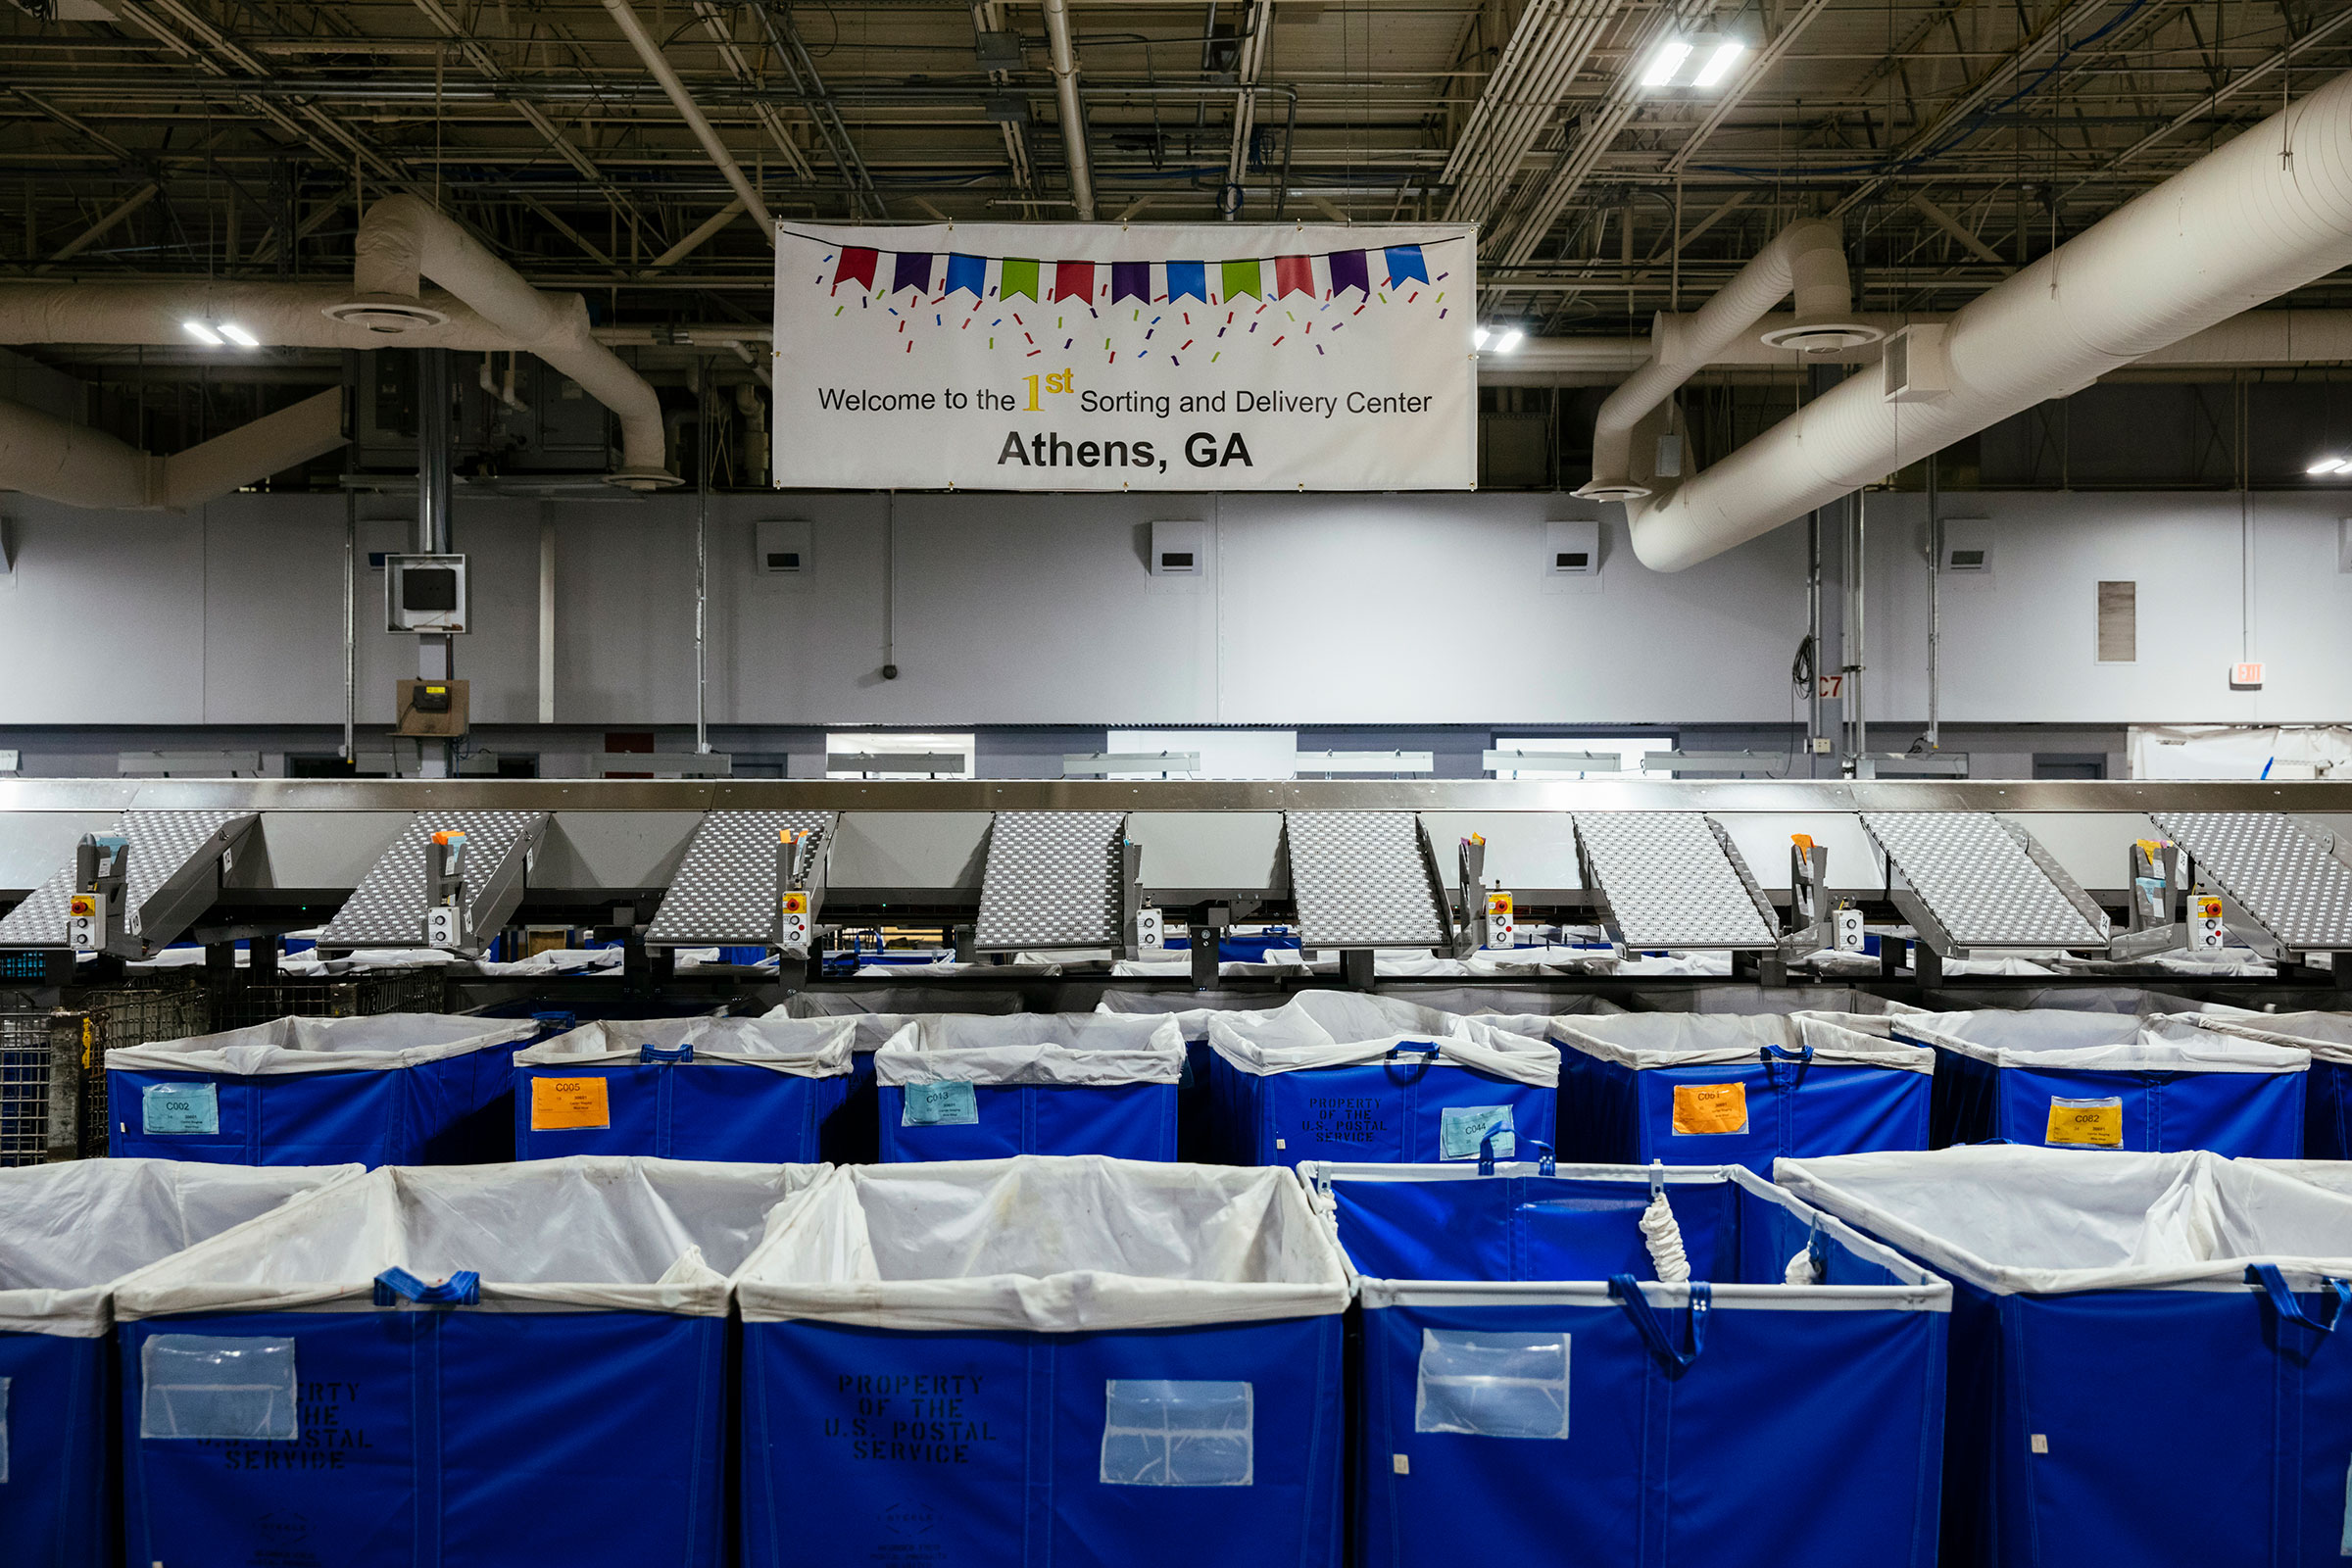 The Sorting and Delivery Center in Athens, Ga., which the Postal Service is renovating with new equipment and EV charging stations with the goal of making regional delivery more efficient (Kendrick Brinson for TIME)